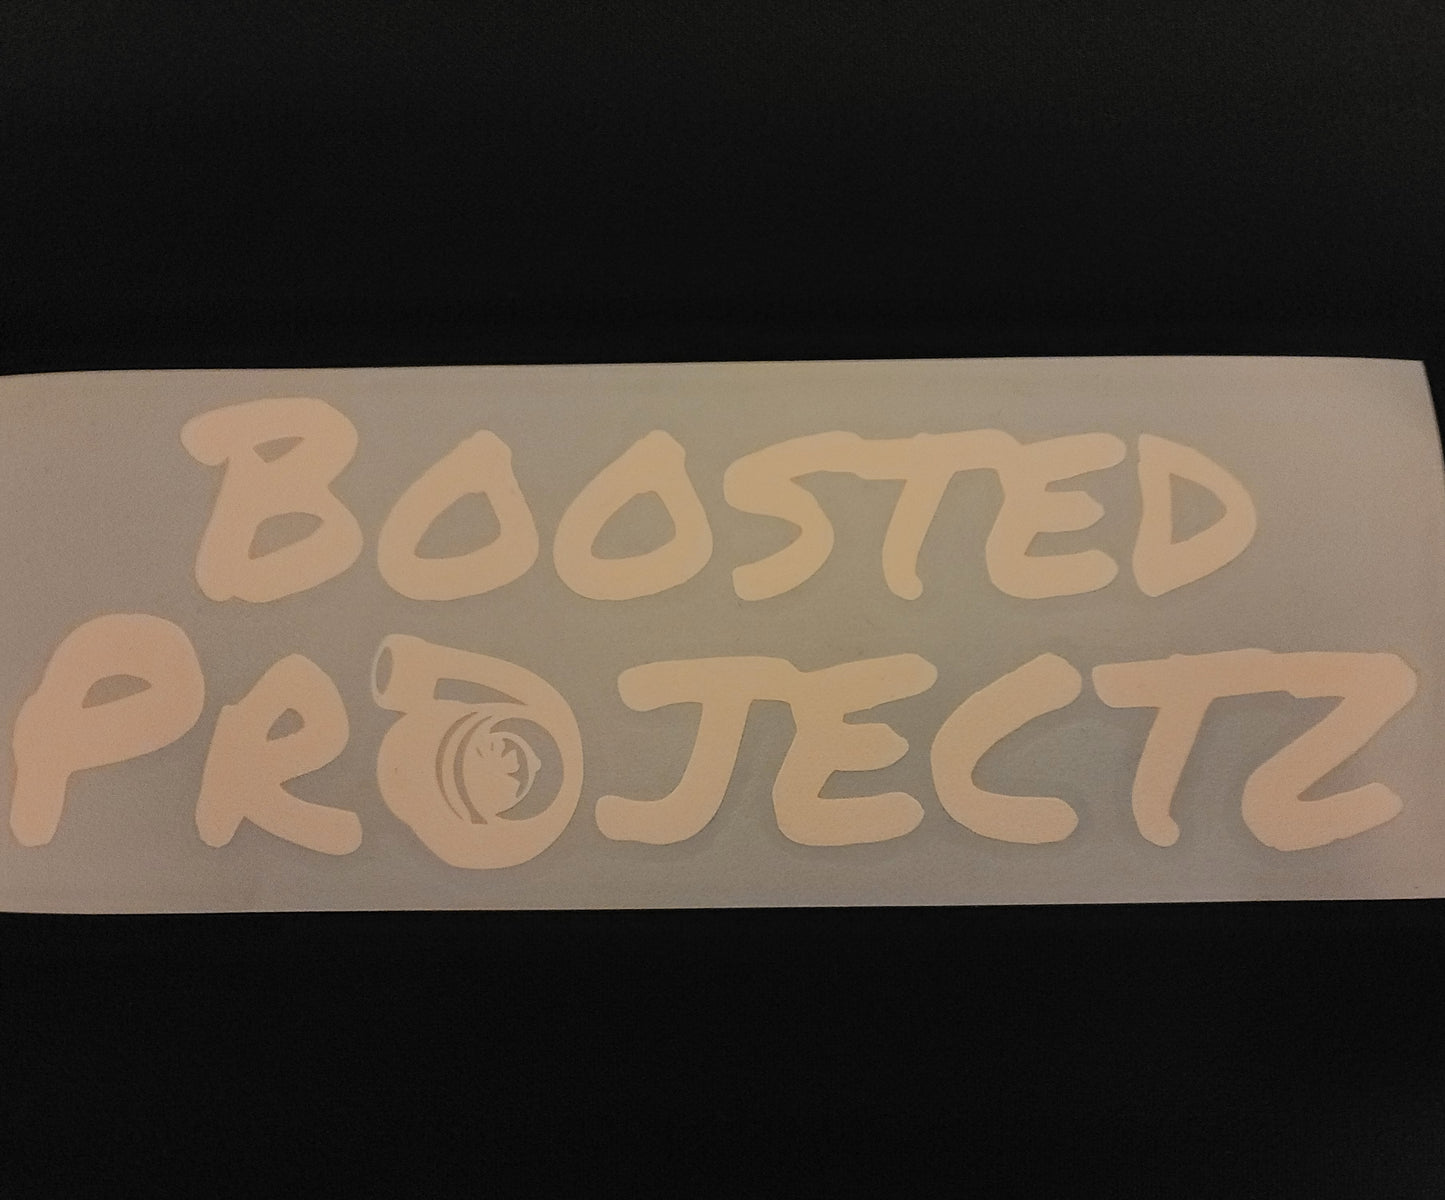 Boosted projectz sticker